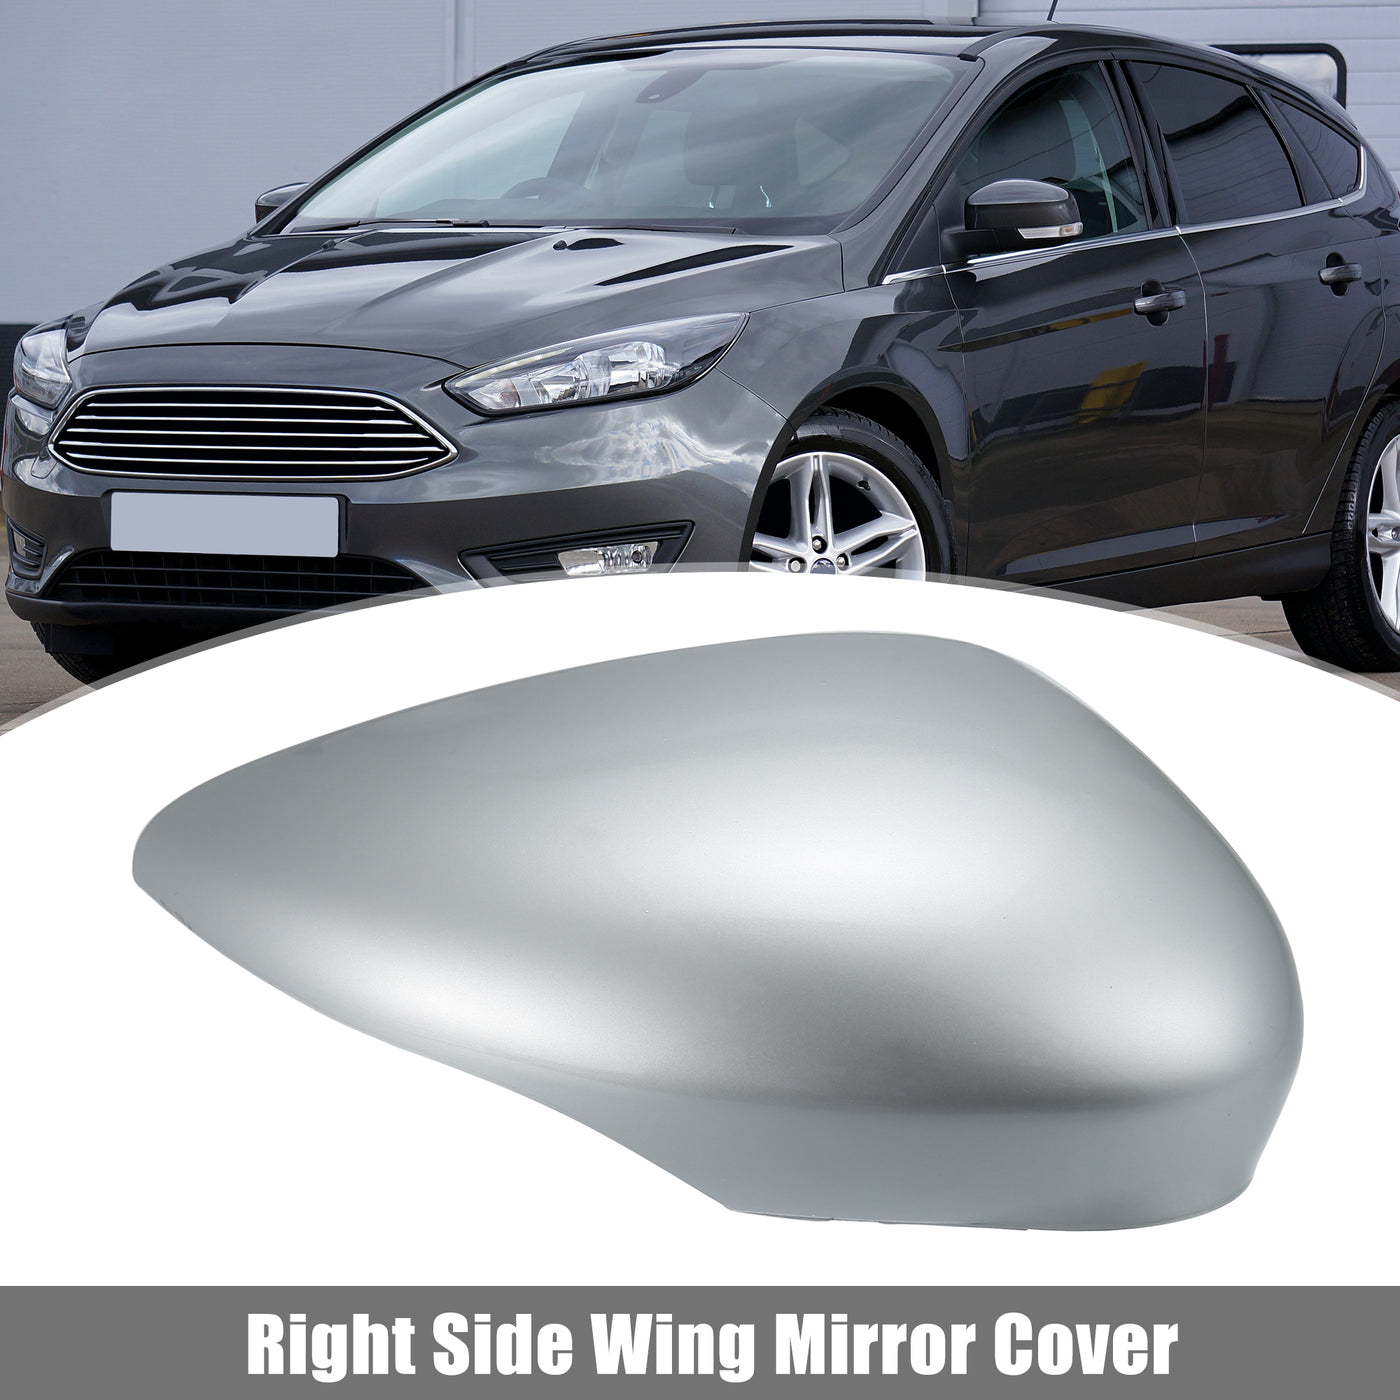 X AUTOHAUX Silver Tone Right Side Car Side Door Wing Mirror Cover Rear View Mirror Cap for Ford Fiesta MK7 2008 2009 2010 2011 2012 2013 2014 2015 2016 2017